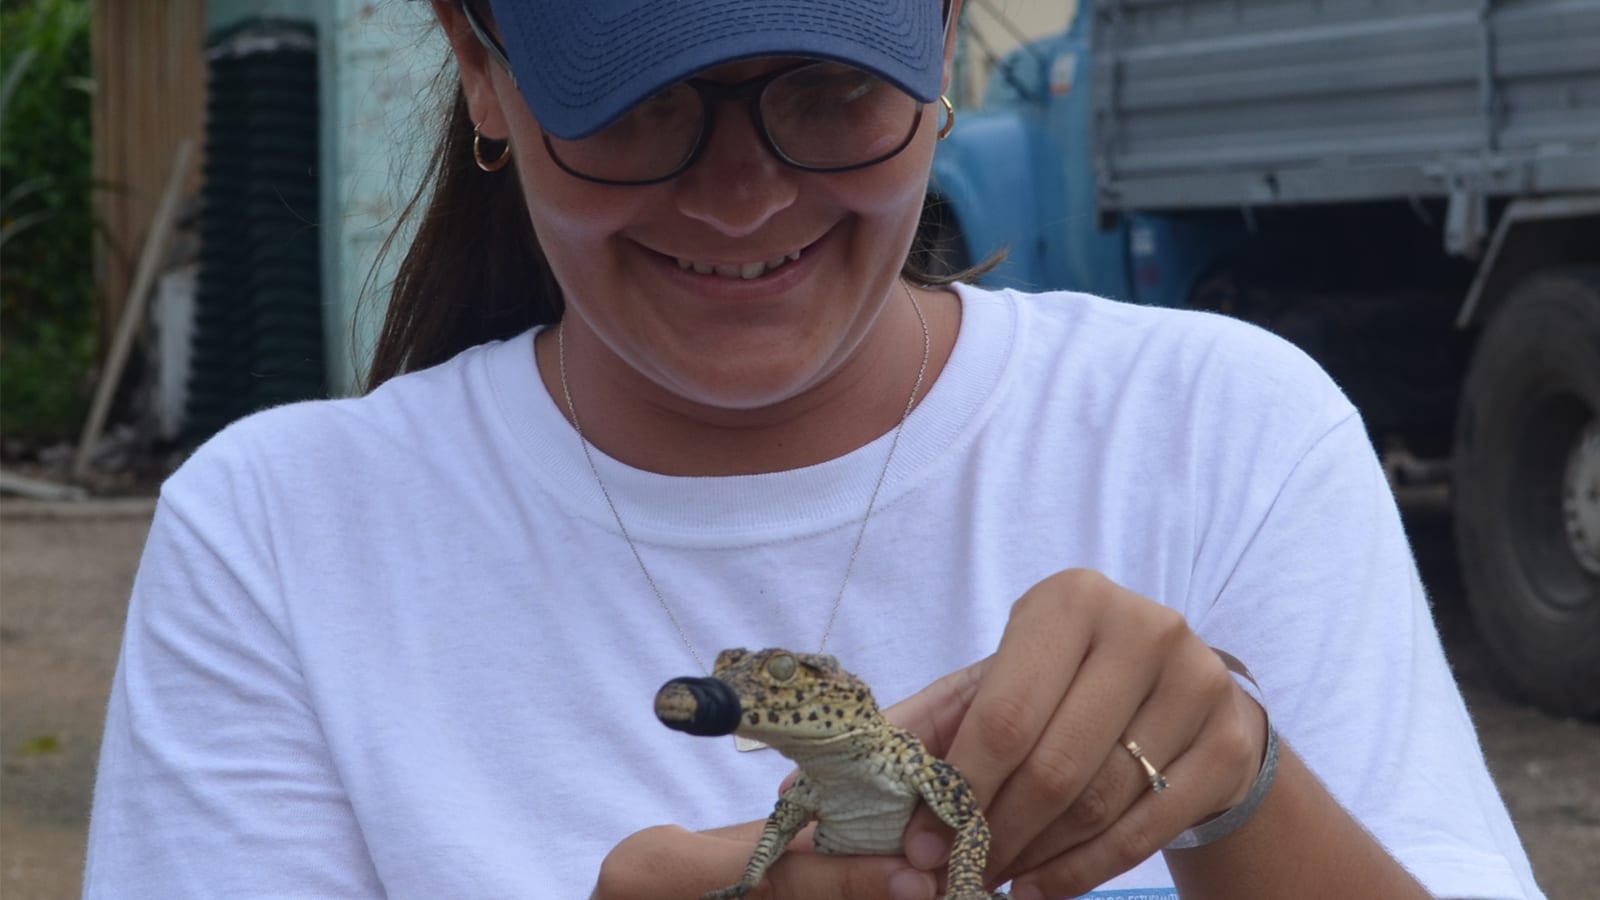 Jessica holds a small reptile